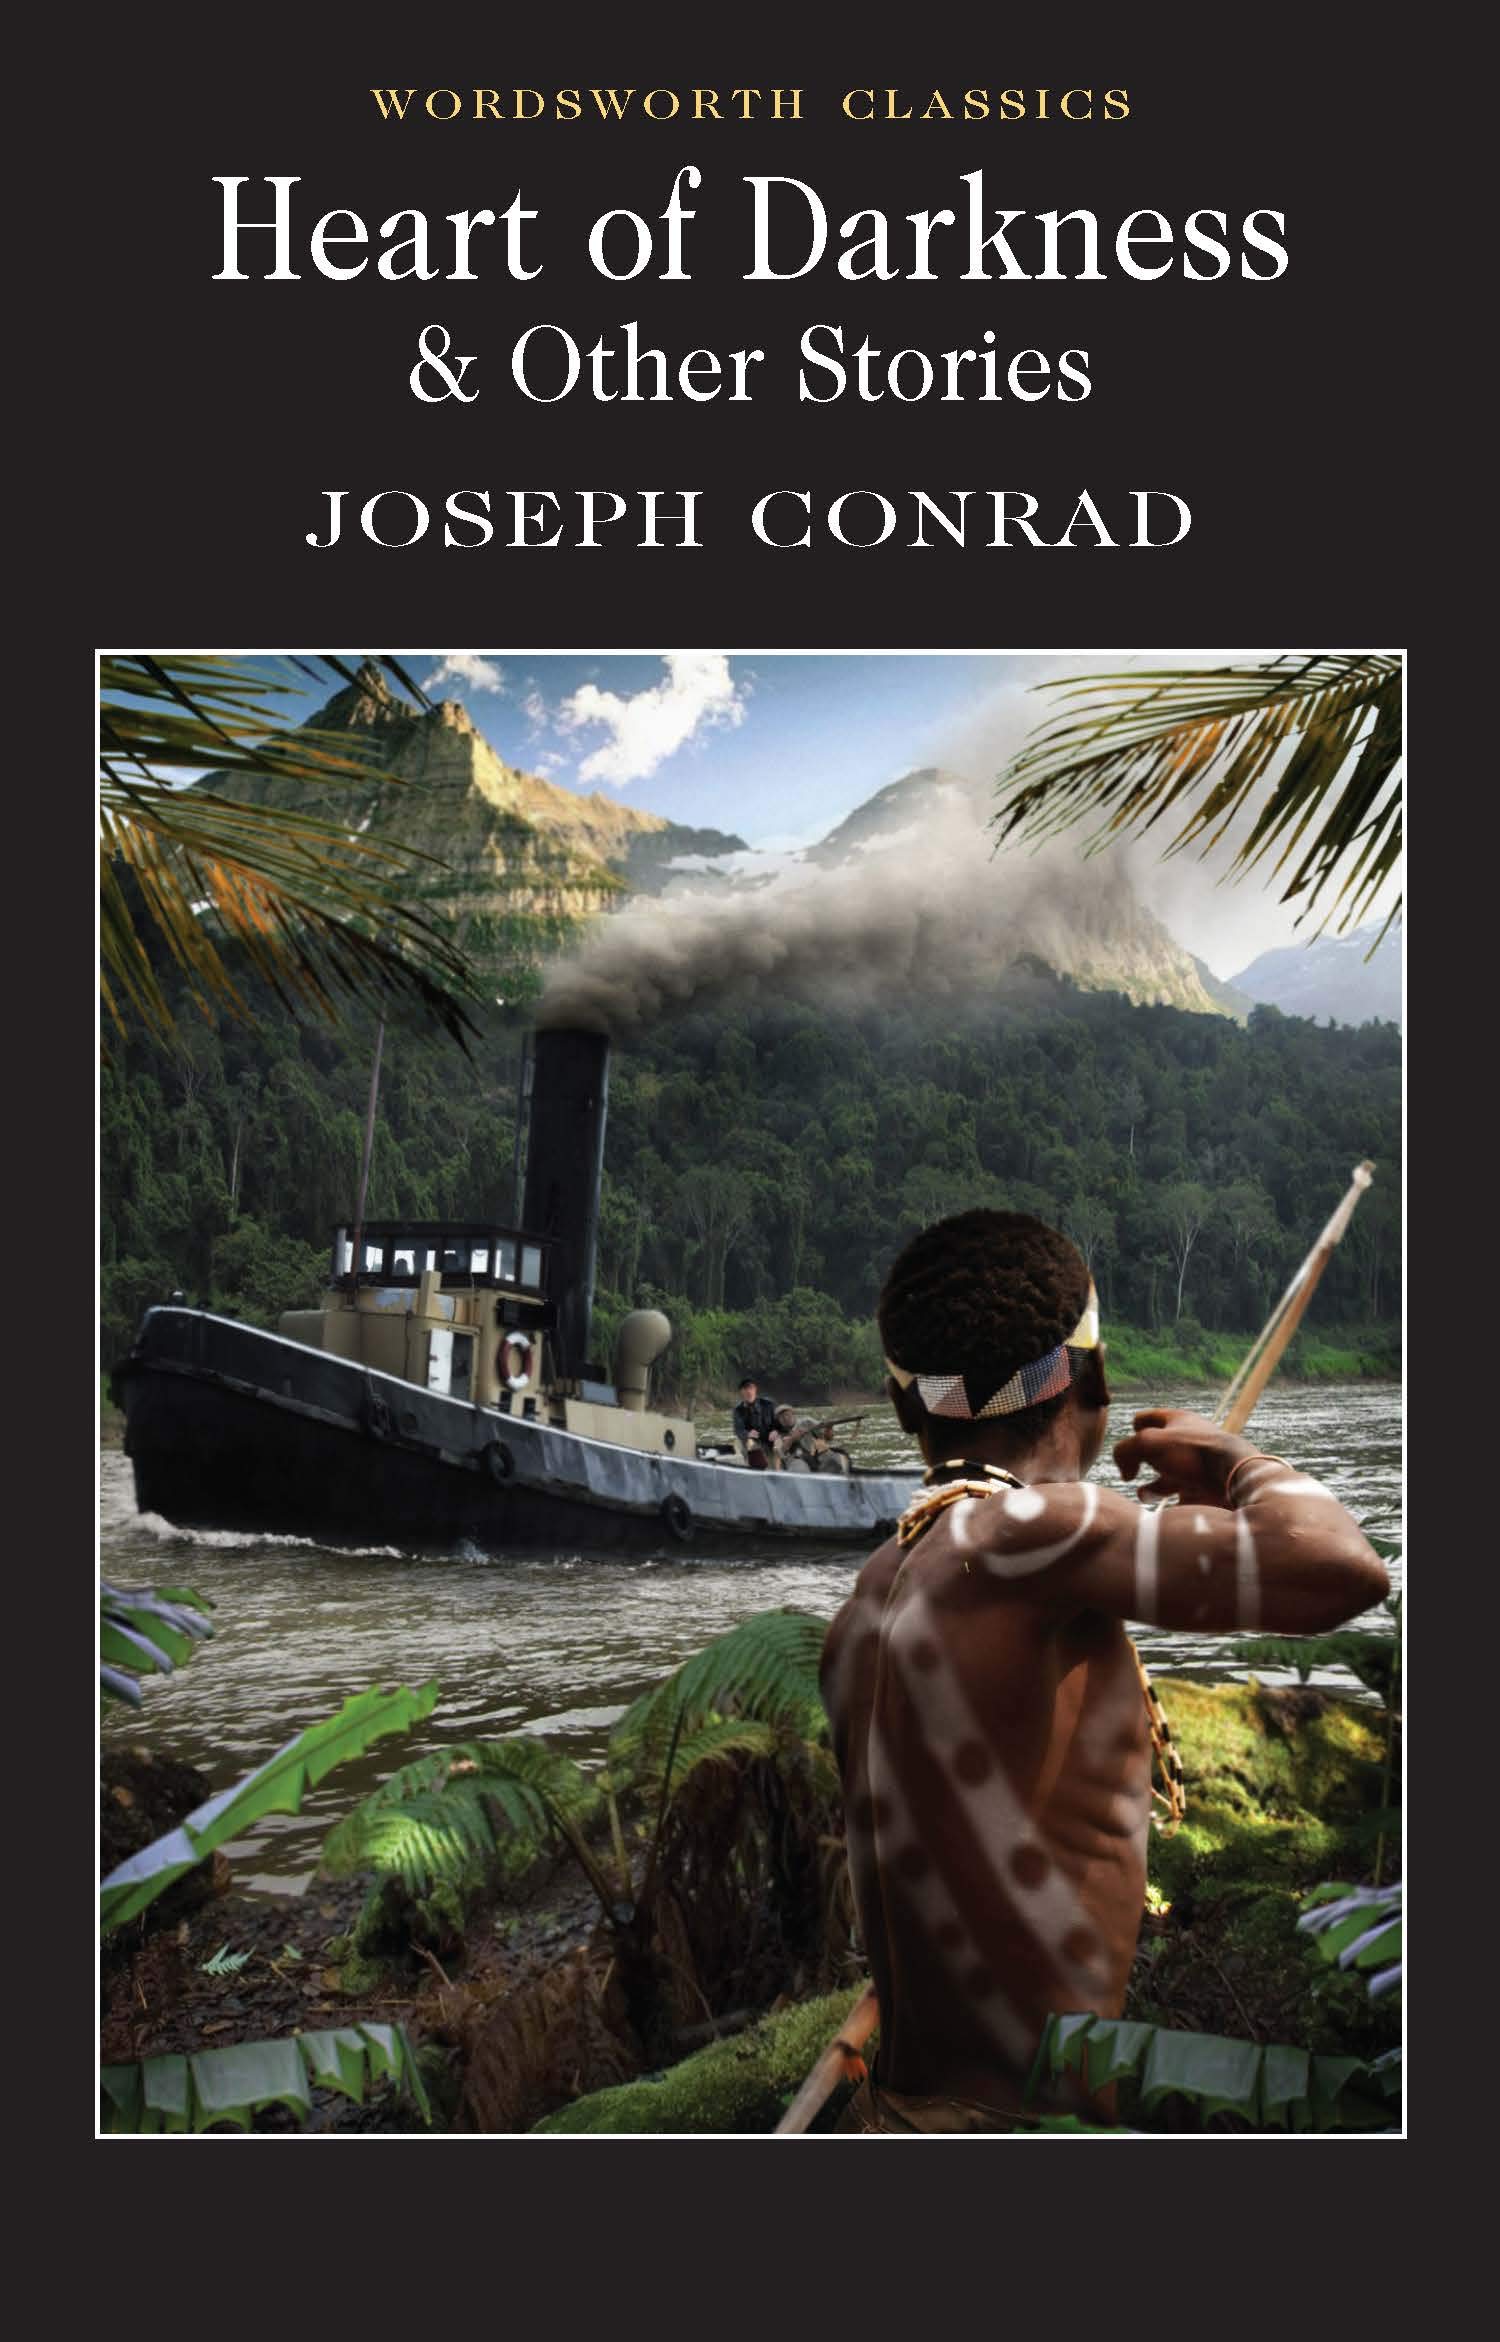 Heart of Darkness & Other Stories | Joseph Conrad image22